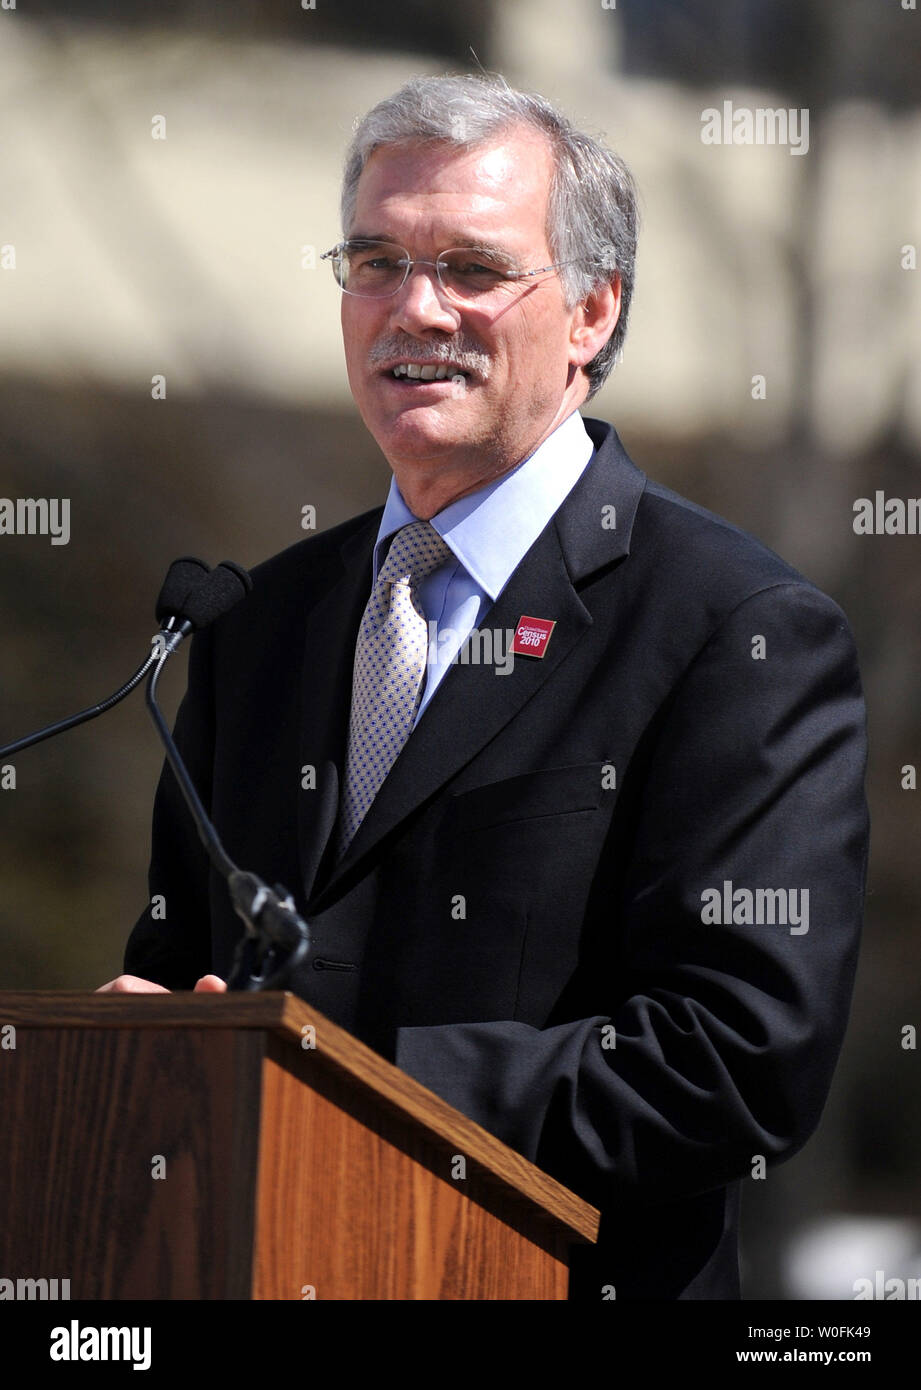 Census Director Robert M. Groves speaks at a Census rally in Washington on April 1, 2010. Groves urged D.C. residents to complete their Census forms so future funding could be better allocated in the District.  UPI/Kevin Dietsch Stock Photo